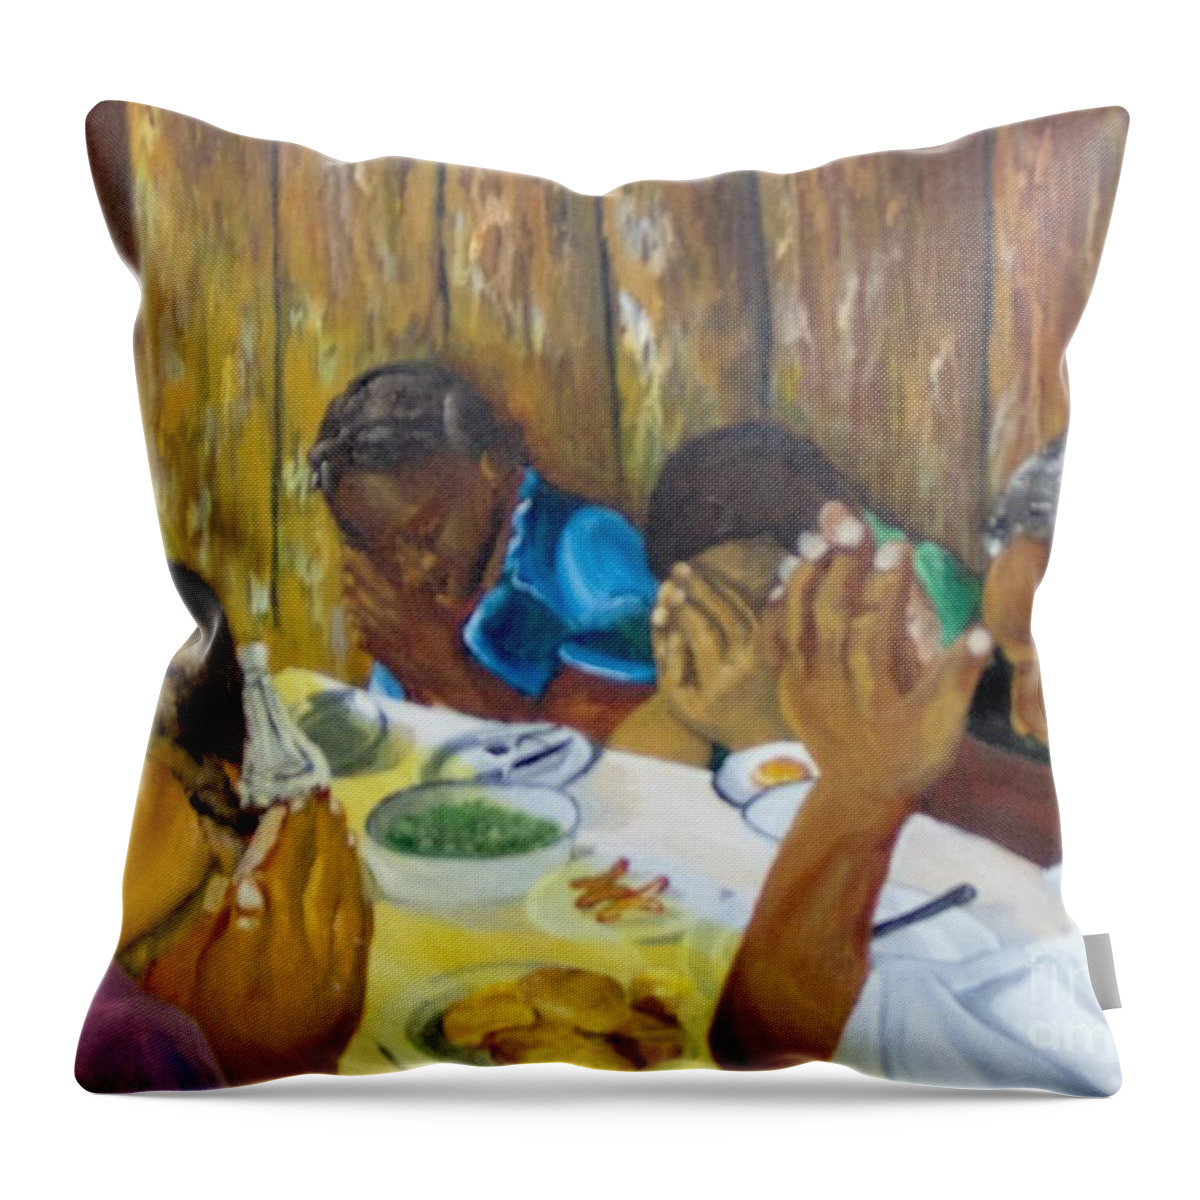 Prayer Throw Pillow featuring the painting Humble Gratitude by Saundra Johnson